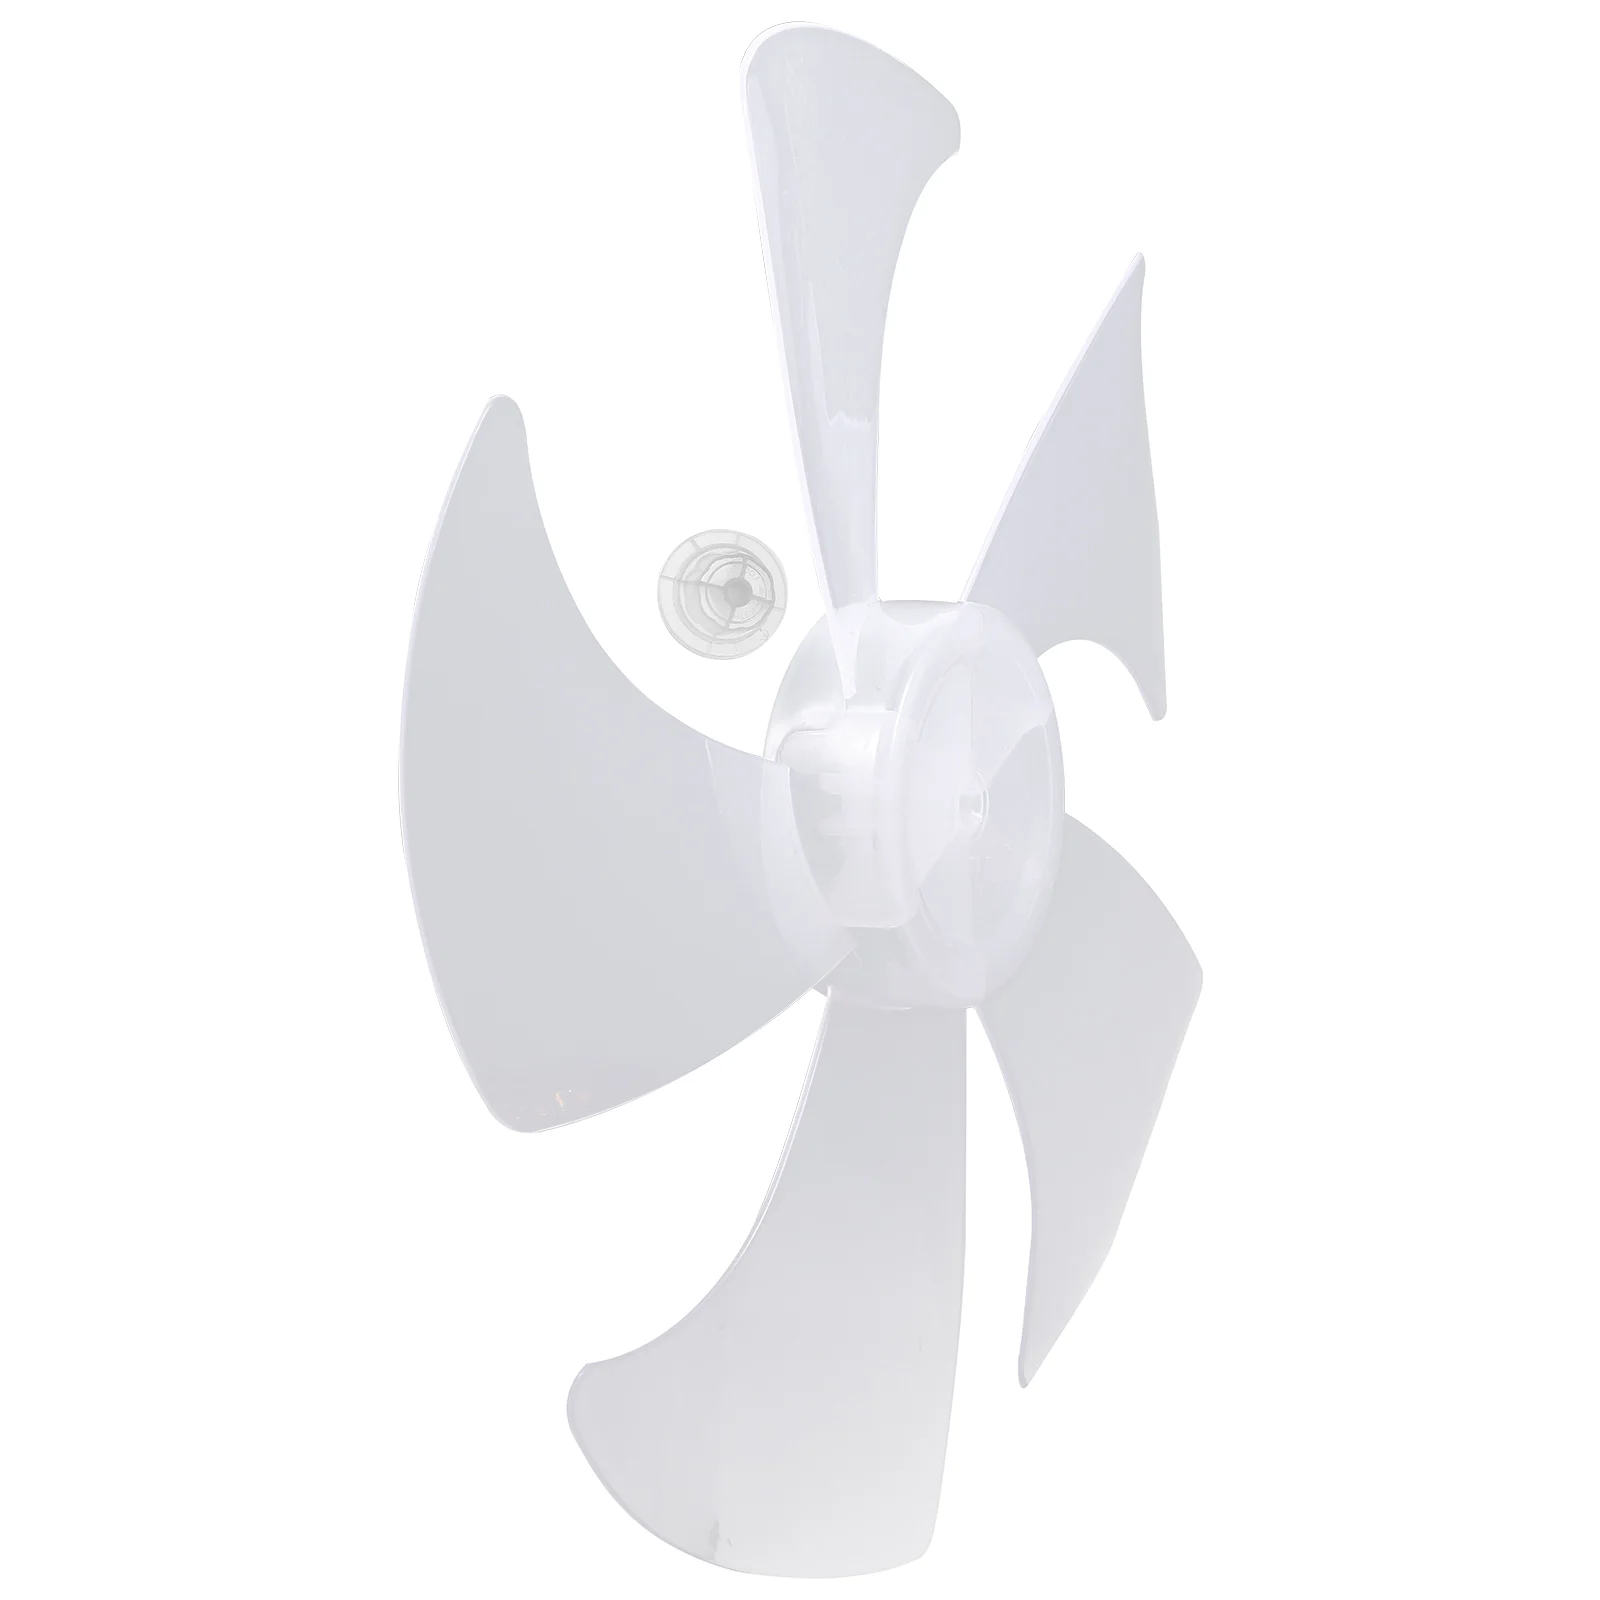 14Inch Ceiling Desktop Fans Blades Electric Ceiling Desktop Fans Replacement Ceiling Desktop Fans Blades Thickened Universal hanging fans ceiling fan strong wind for bedroom kitchen living room 3 blades diameter 1050mm low noise mosquito net fan fs74